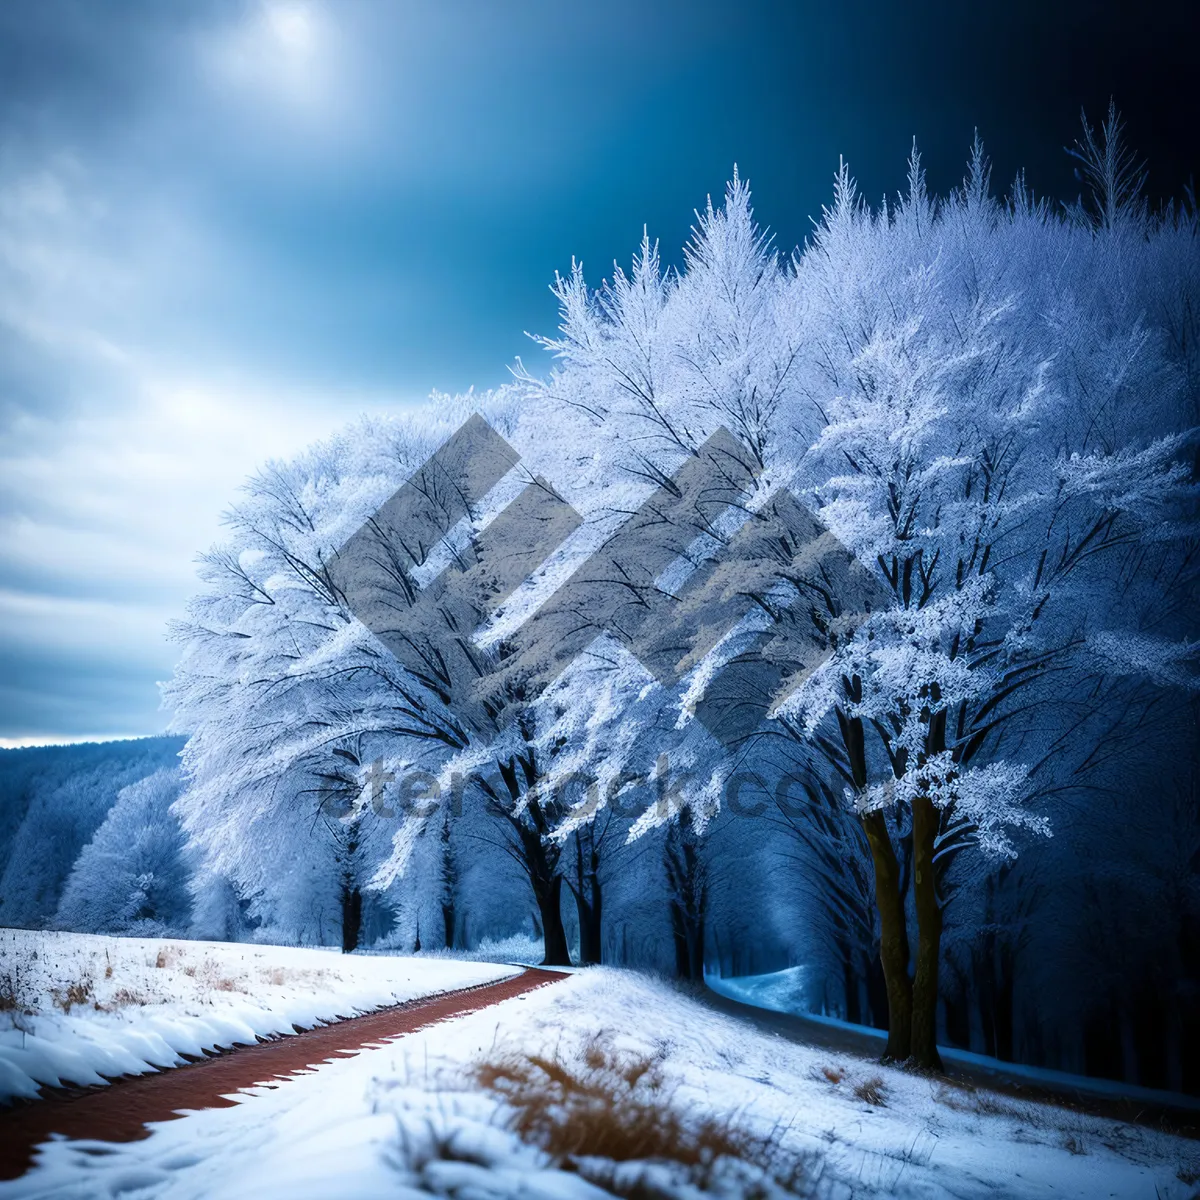 Picture of Winter Wonderland: Serene snowy forest landscape with frozen trees and icy branches